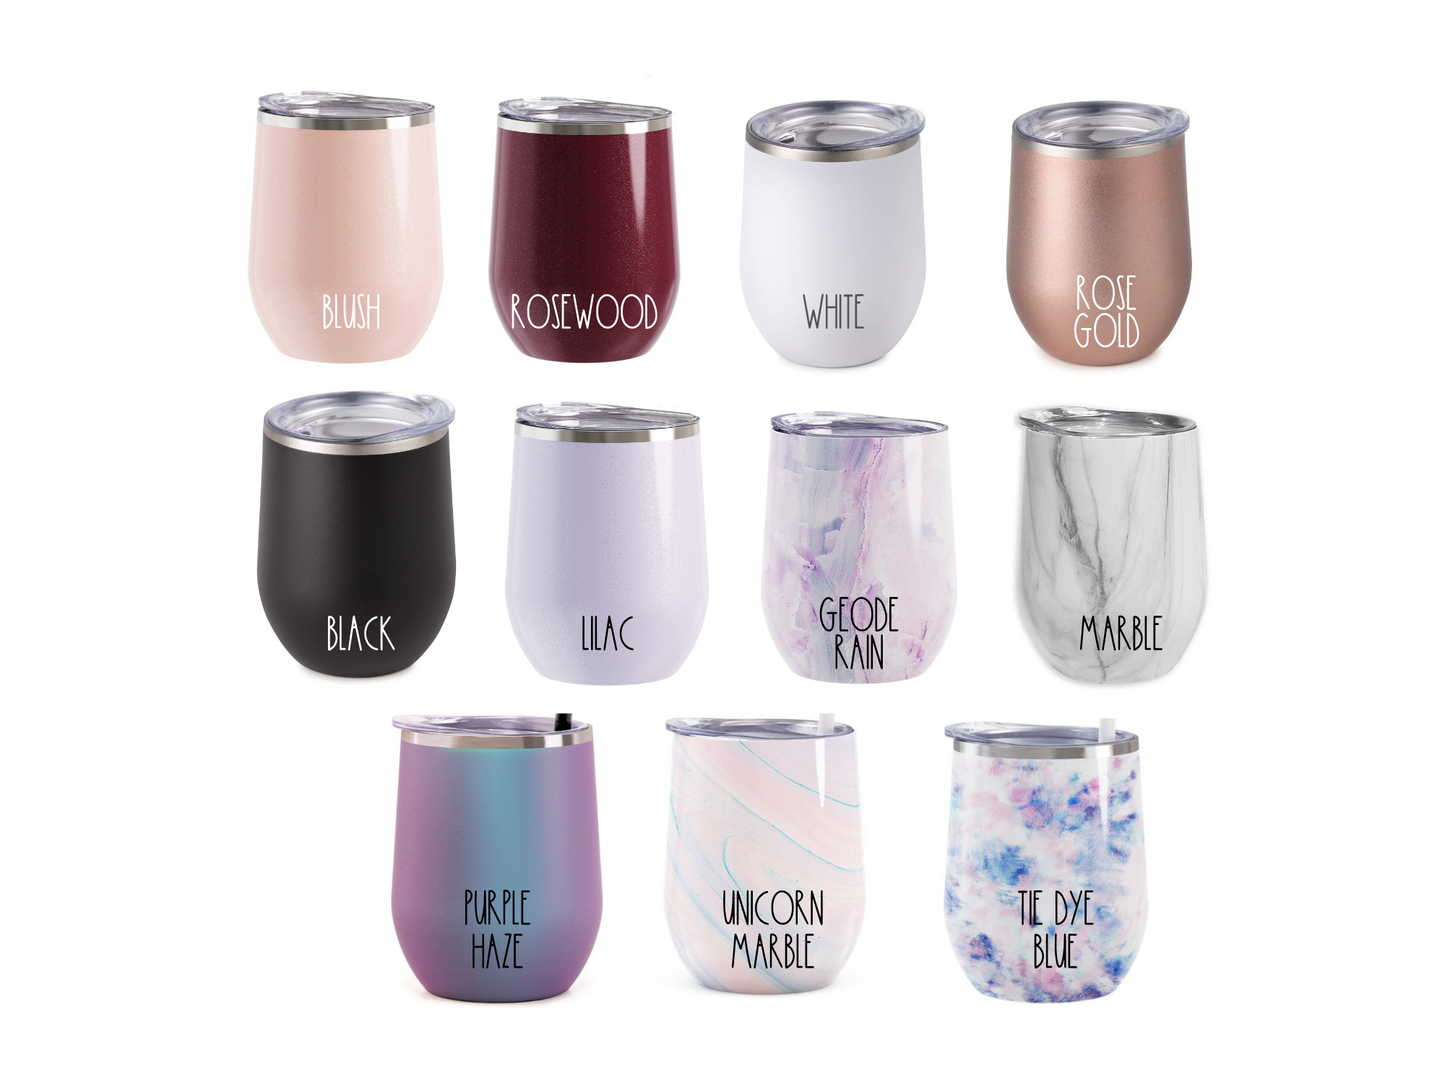 Pink Floral Birthday Gift Box Personalized Wine Tumbler